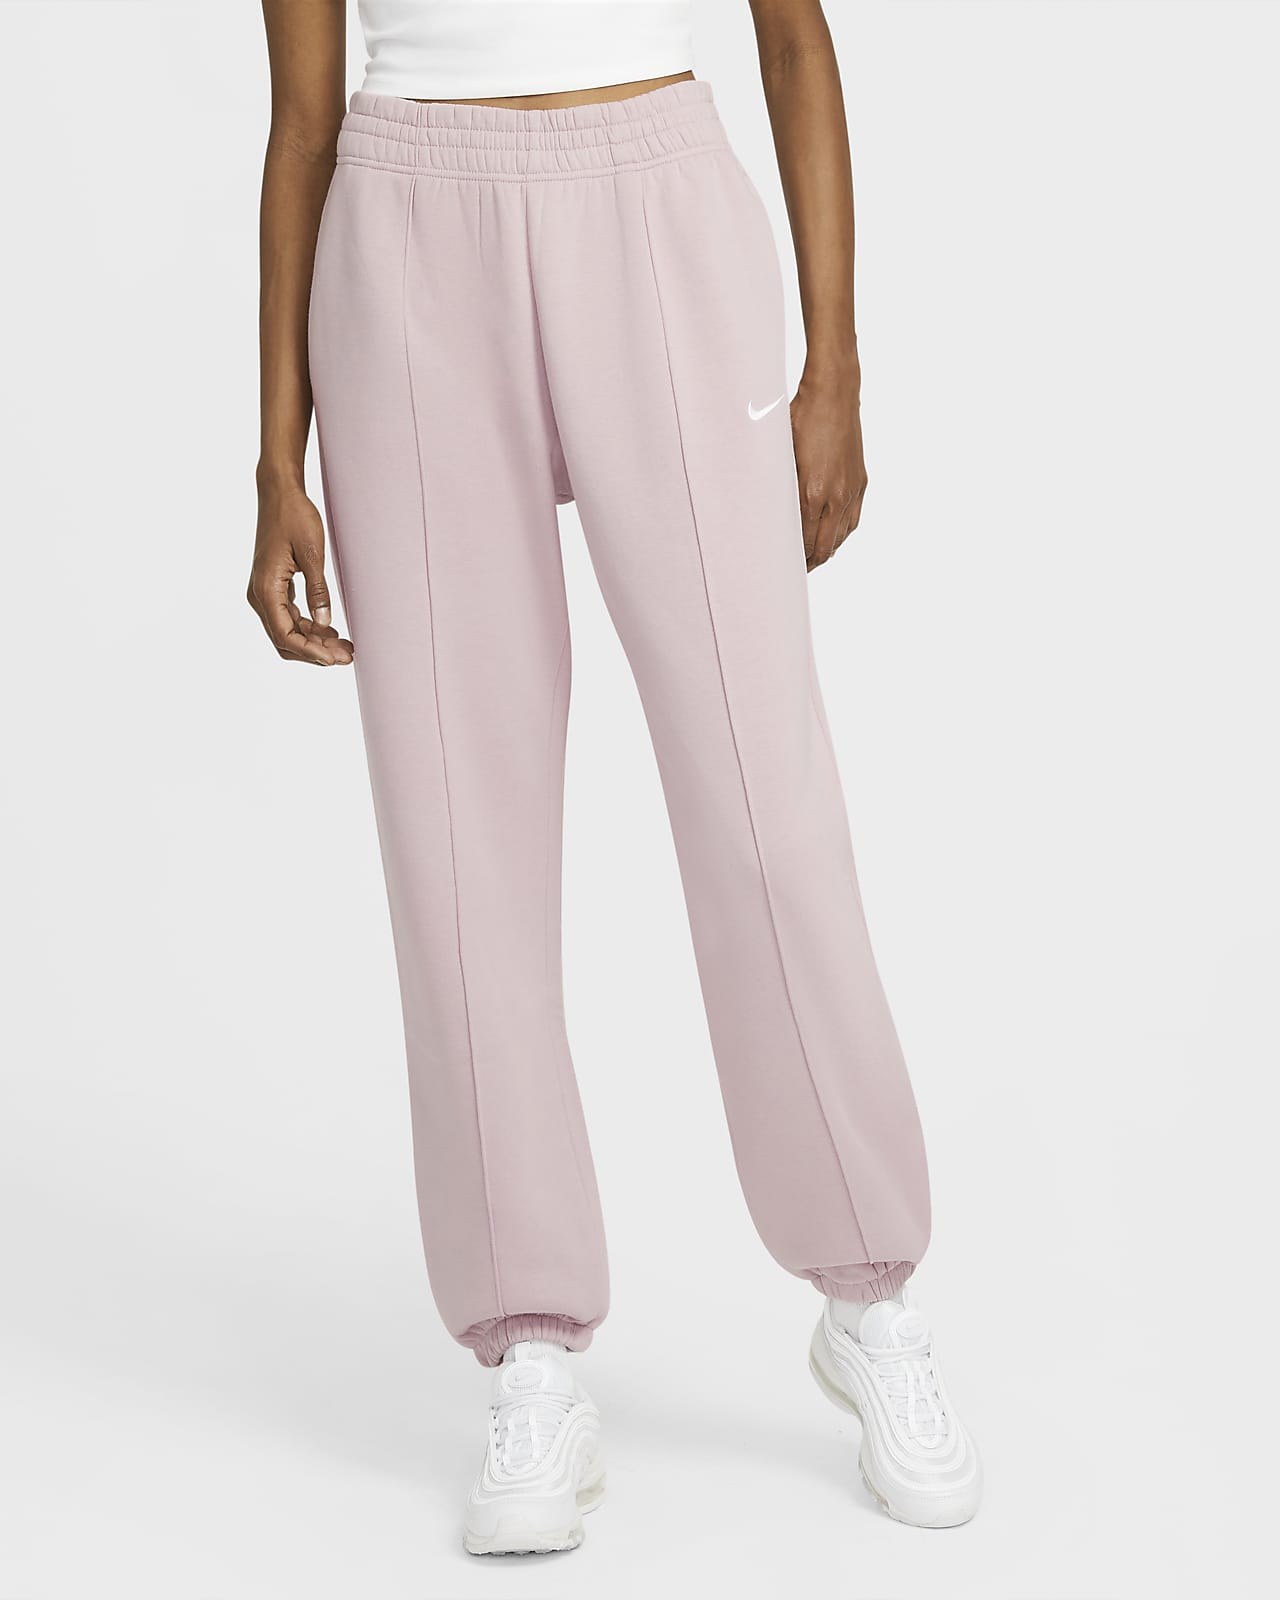 pink nike trousers